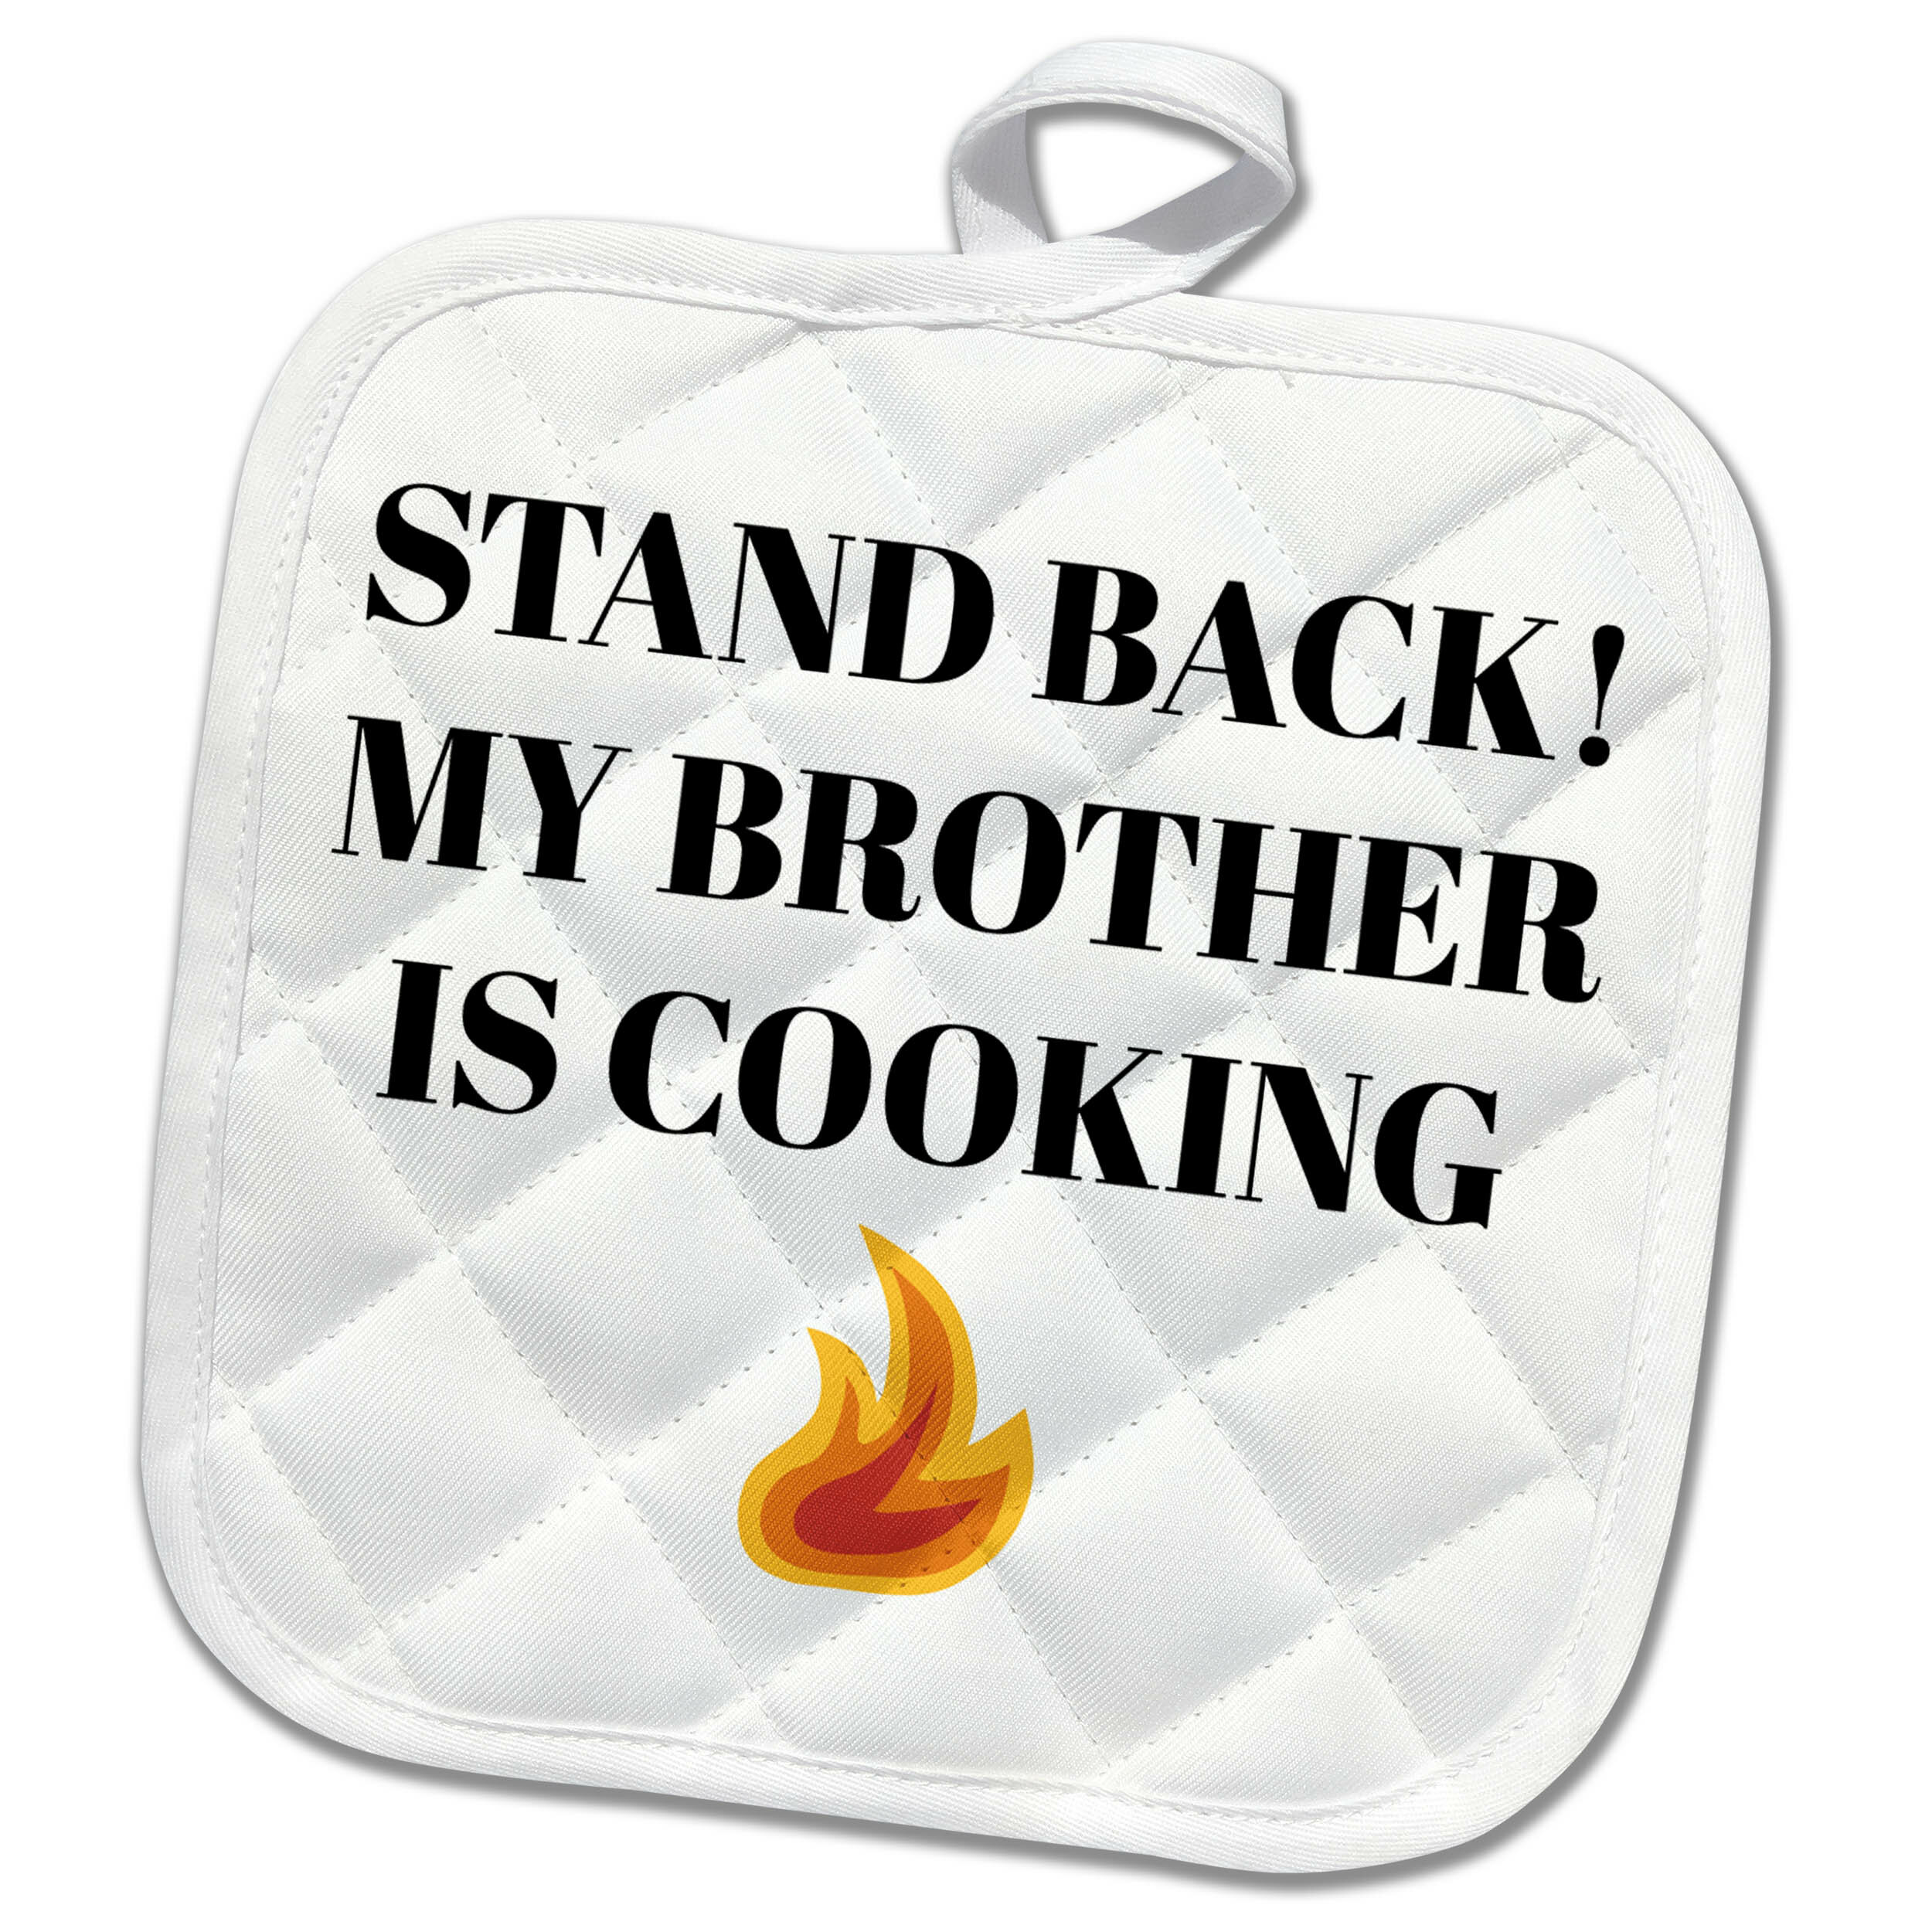 3drose Stand Back My Brother Is Cooking Potholder Wayfair